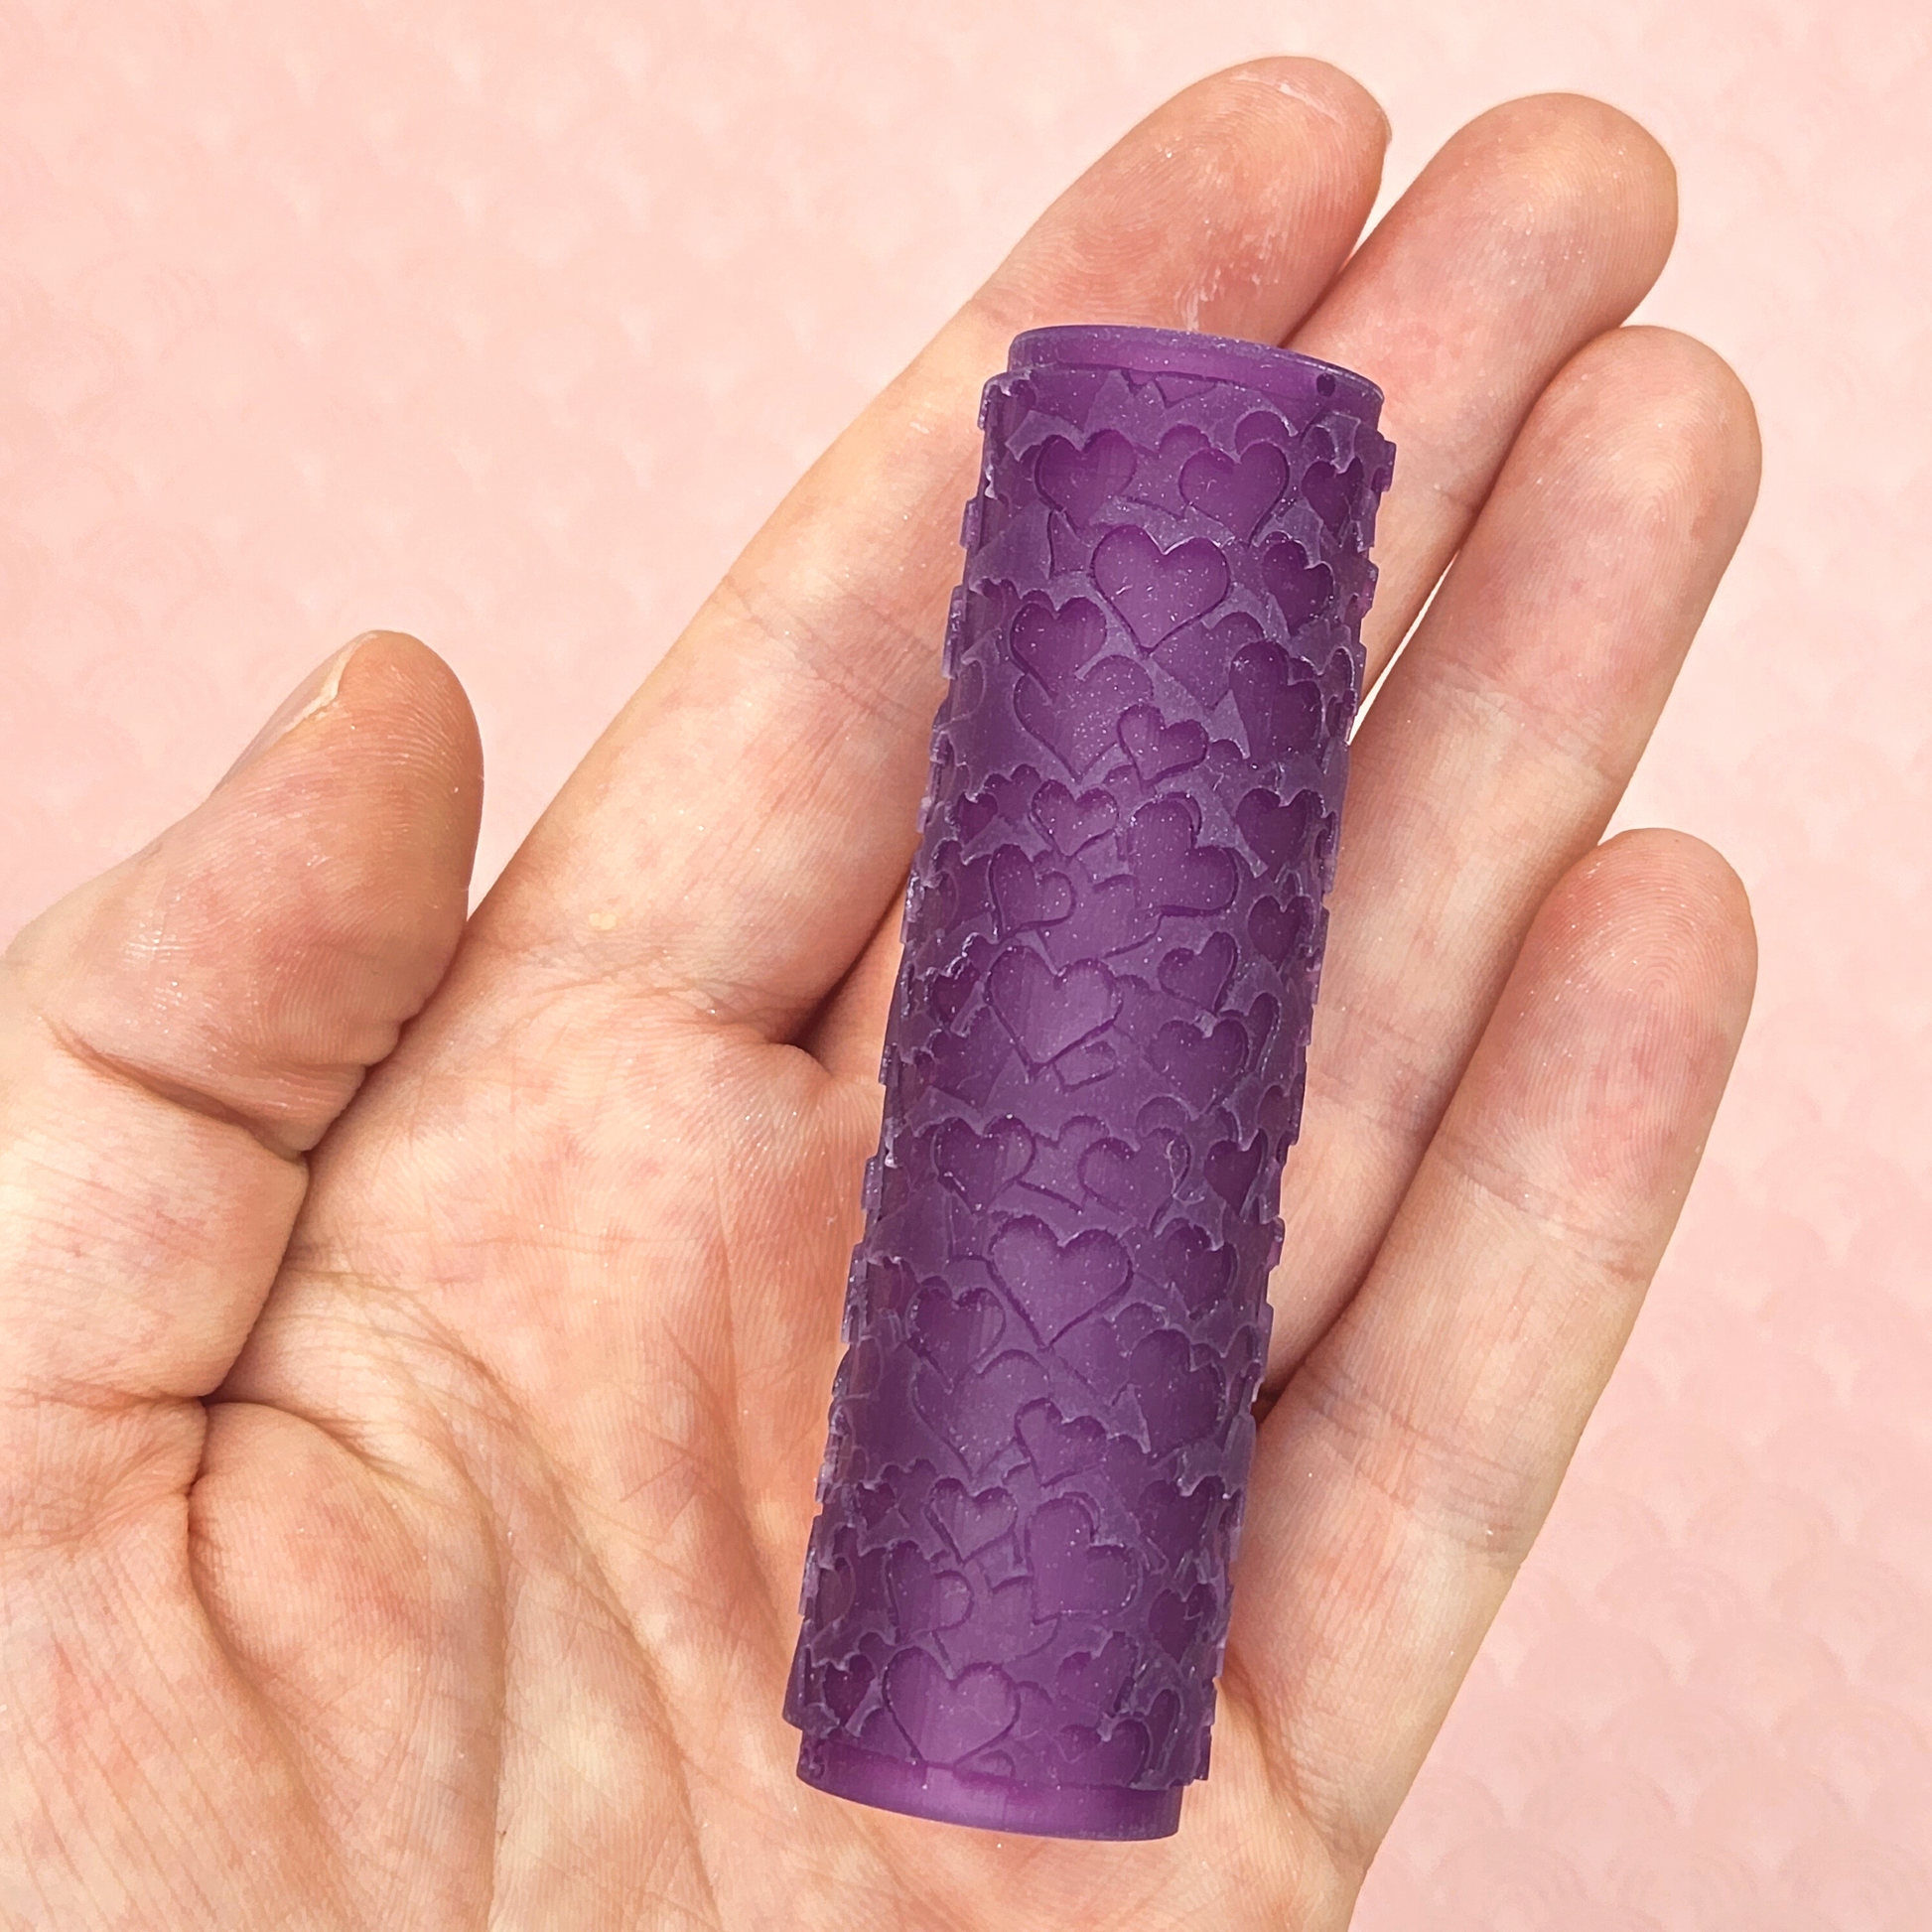 3D printed resin scattered hearts texture roller